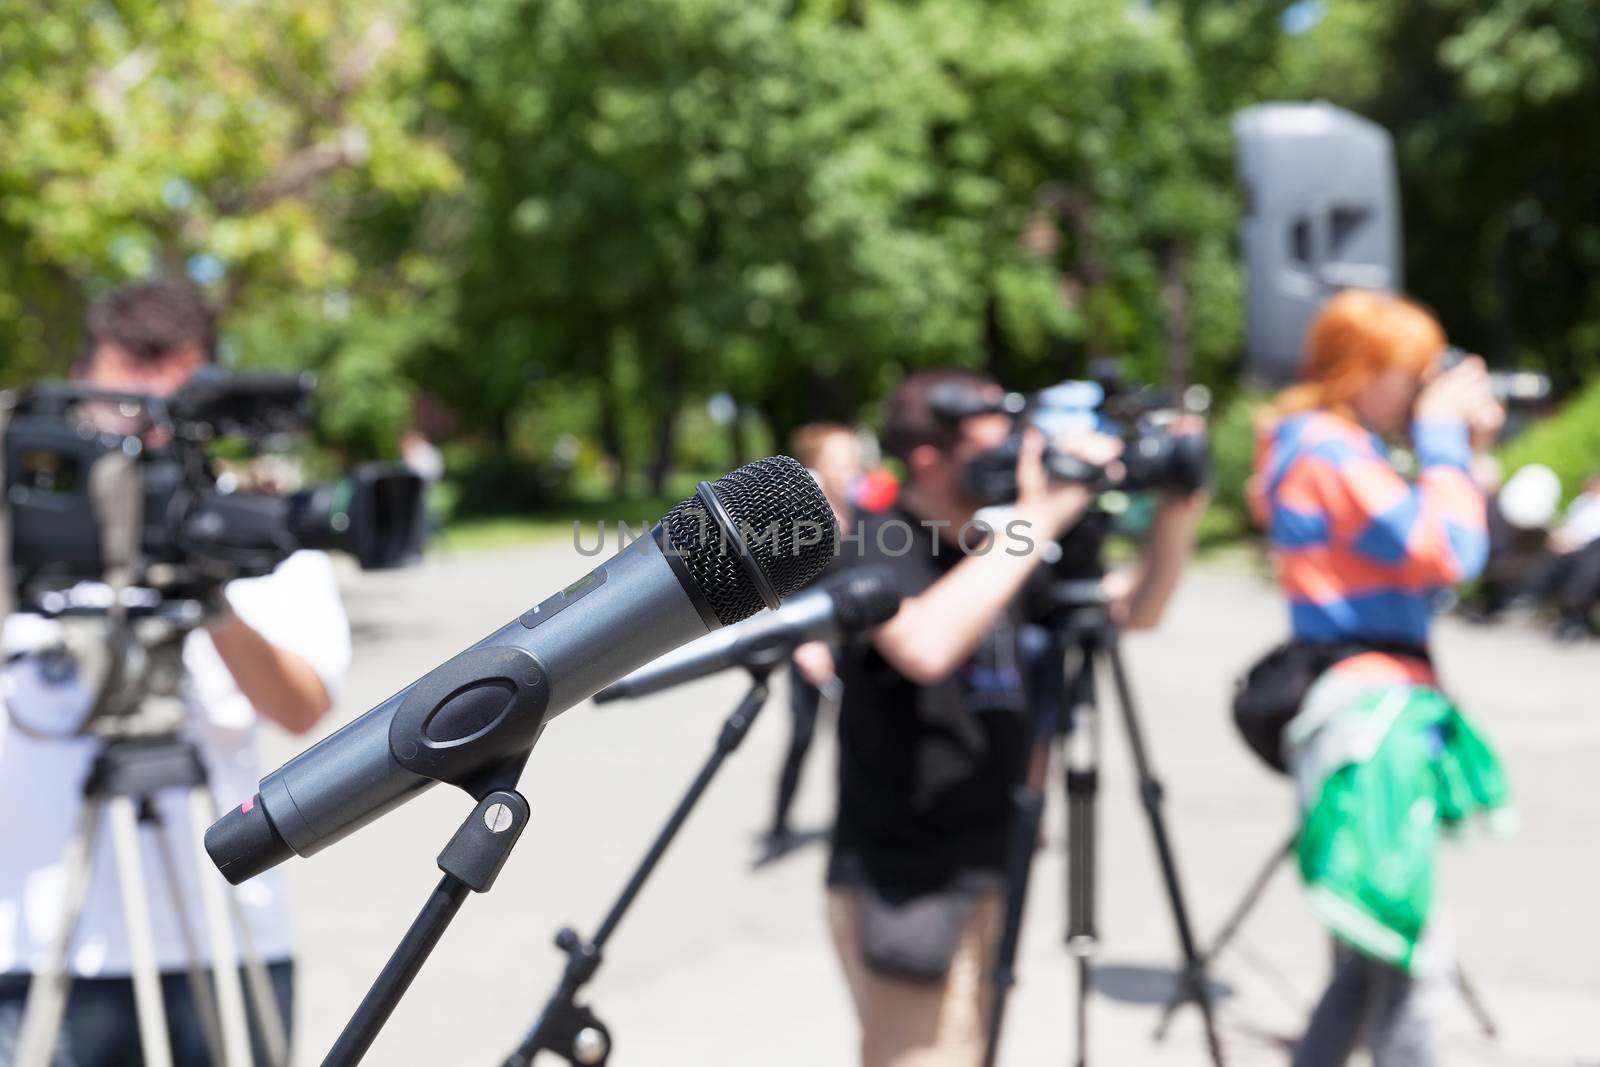 Microphone in focus against blurred camera operators and photographer. Press conference.